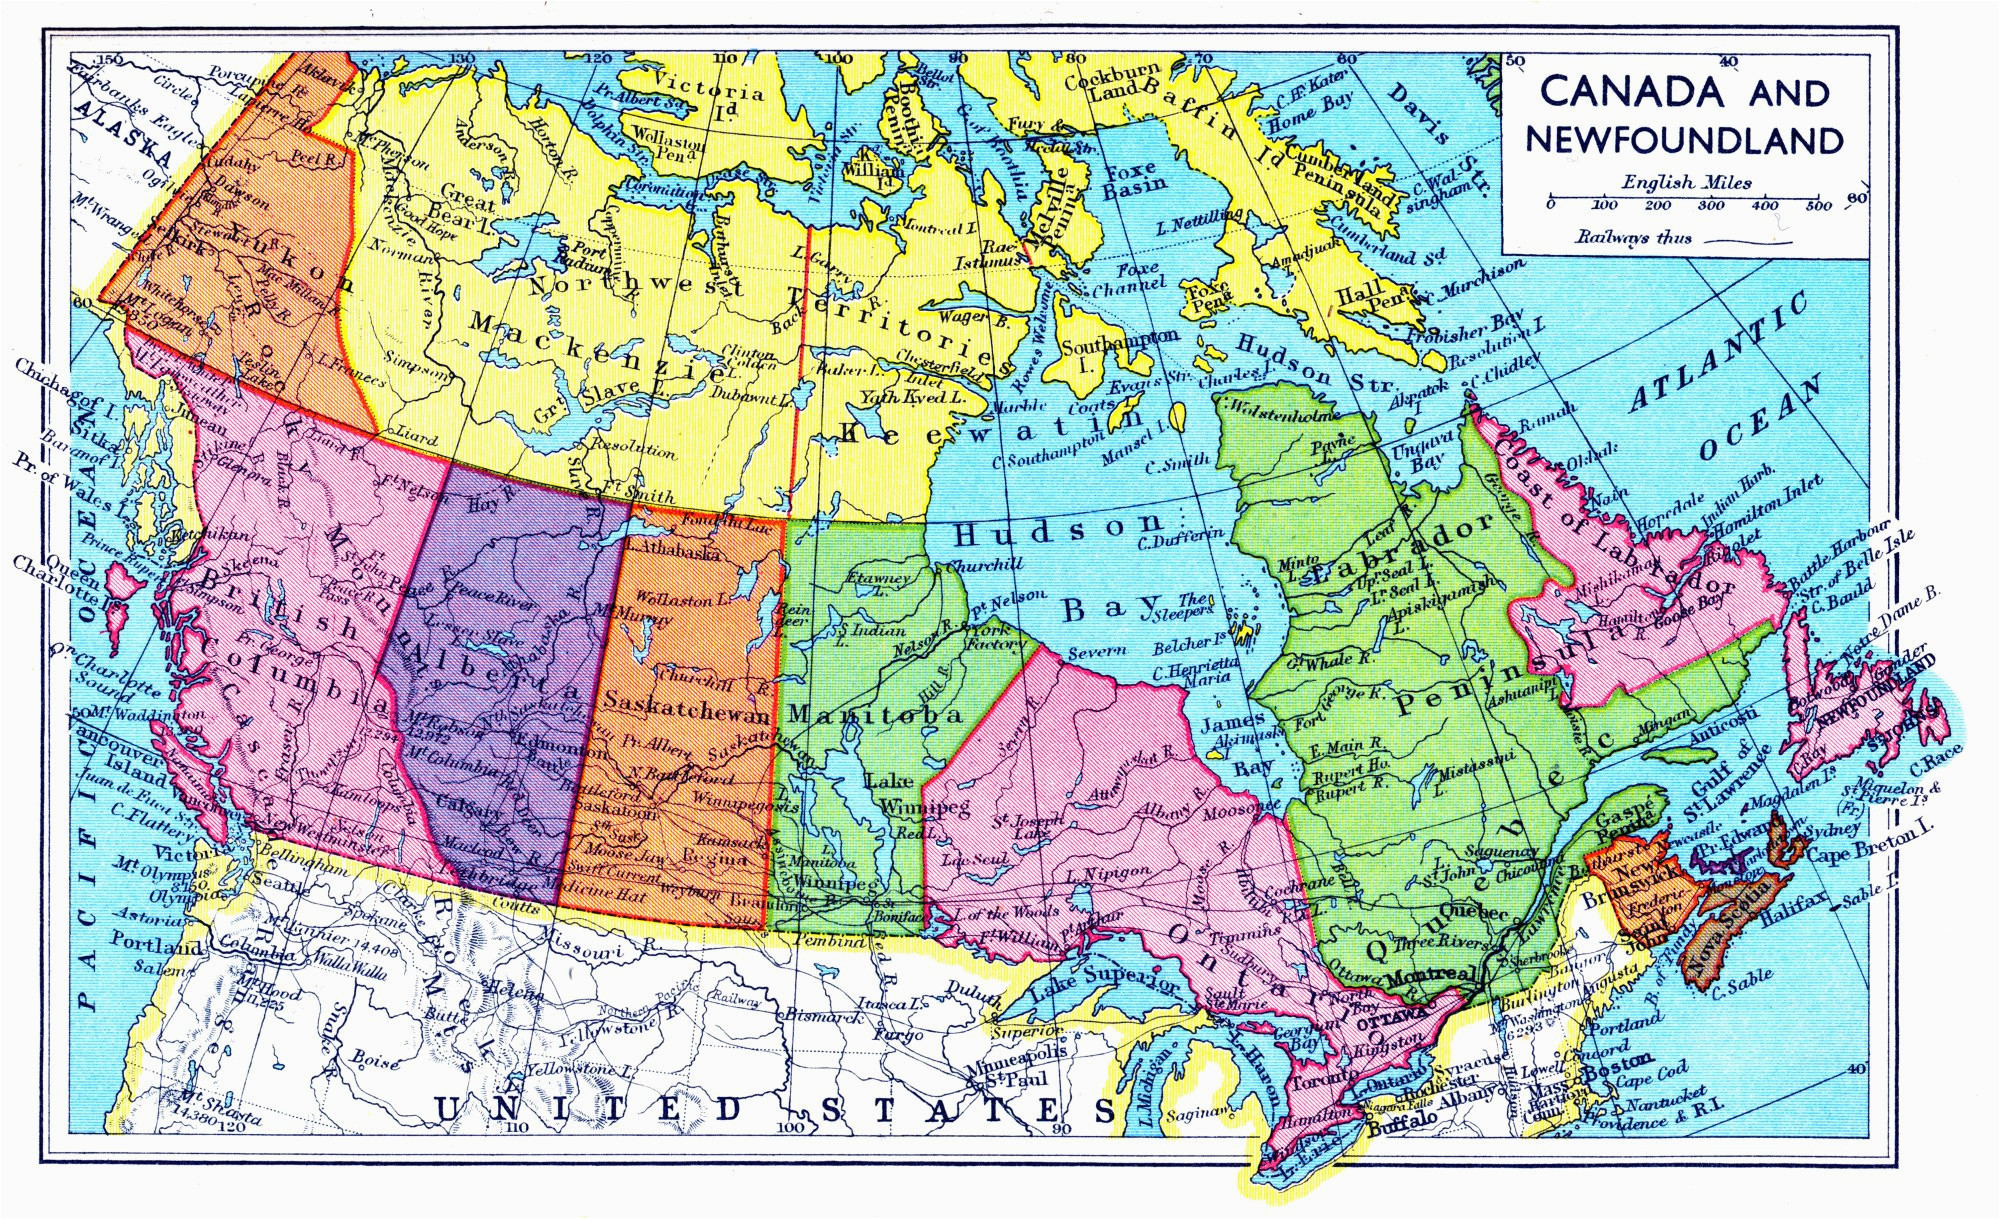 Southern California Wall Map Canada Earthquake Map Pics World Map Floor Puzzle New Map Od Canada